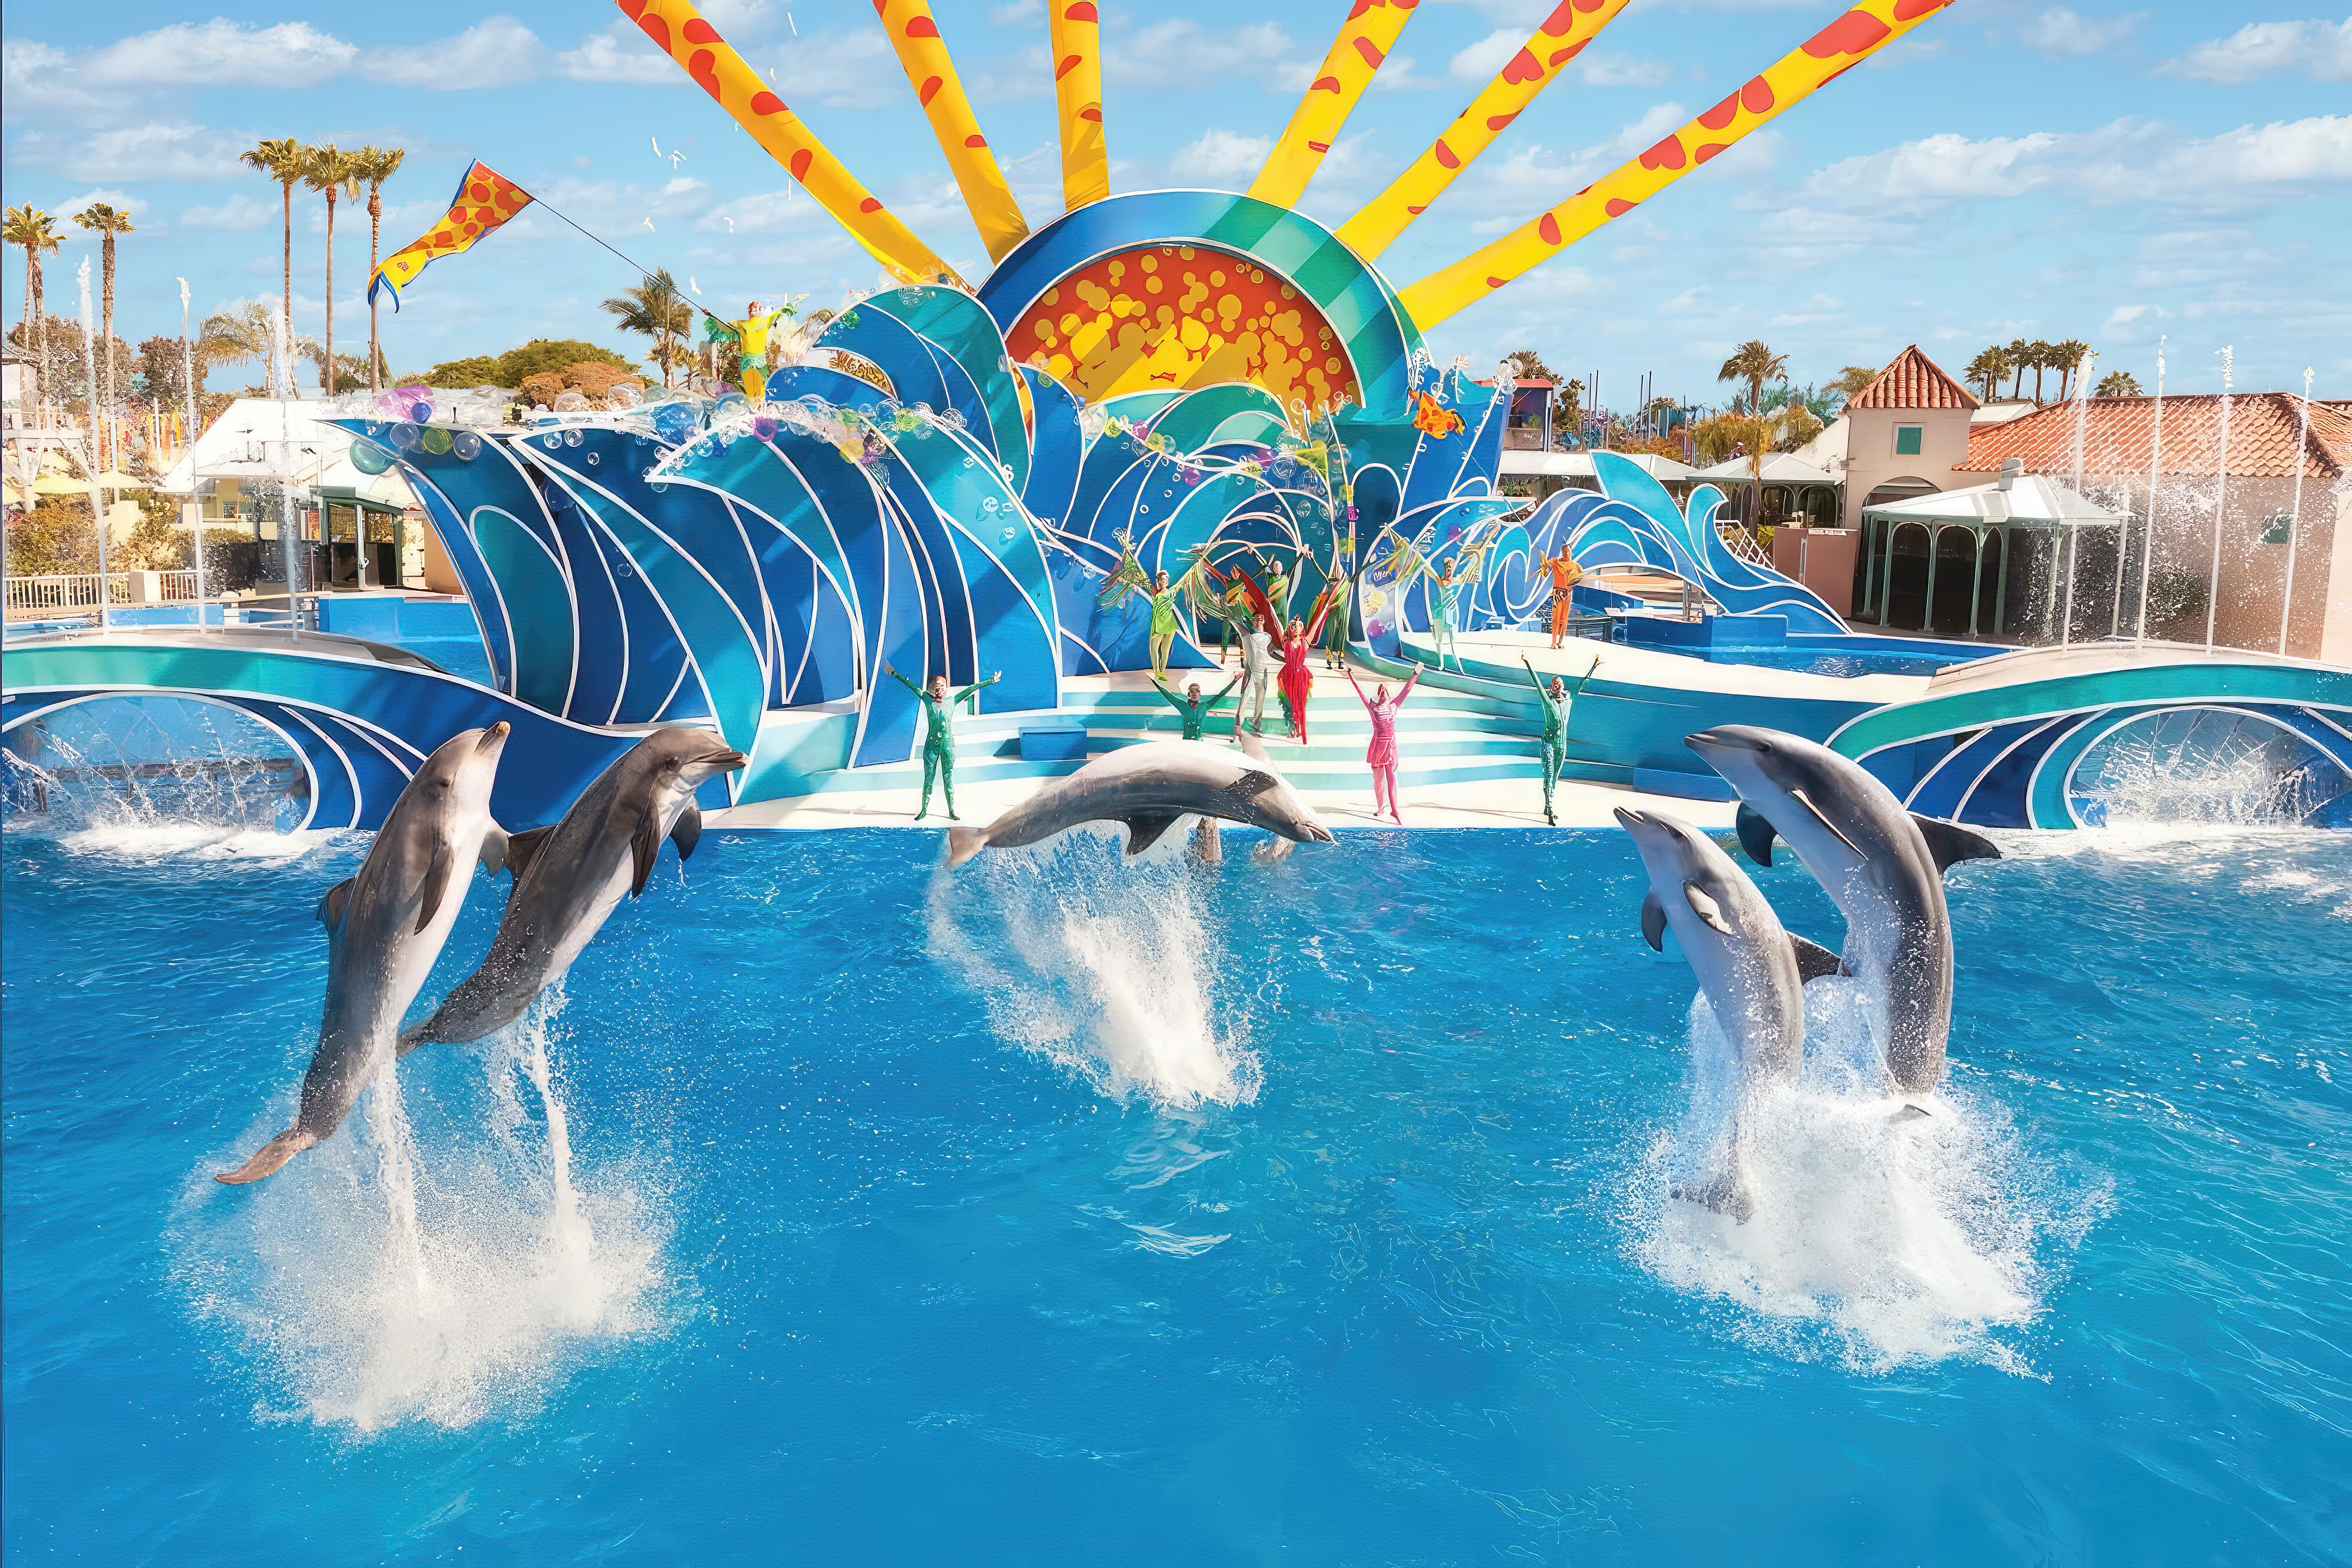 The "Blue Horizons" dolphin show at SeaWorld San Diego